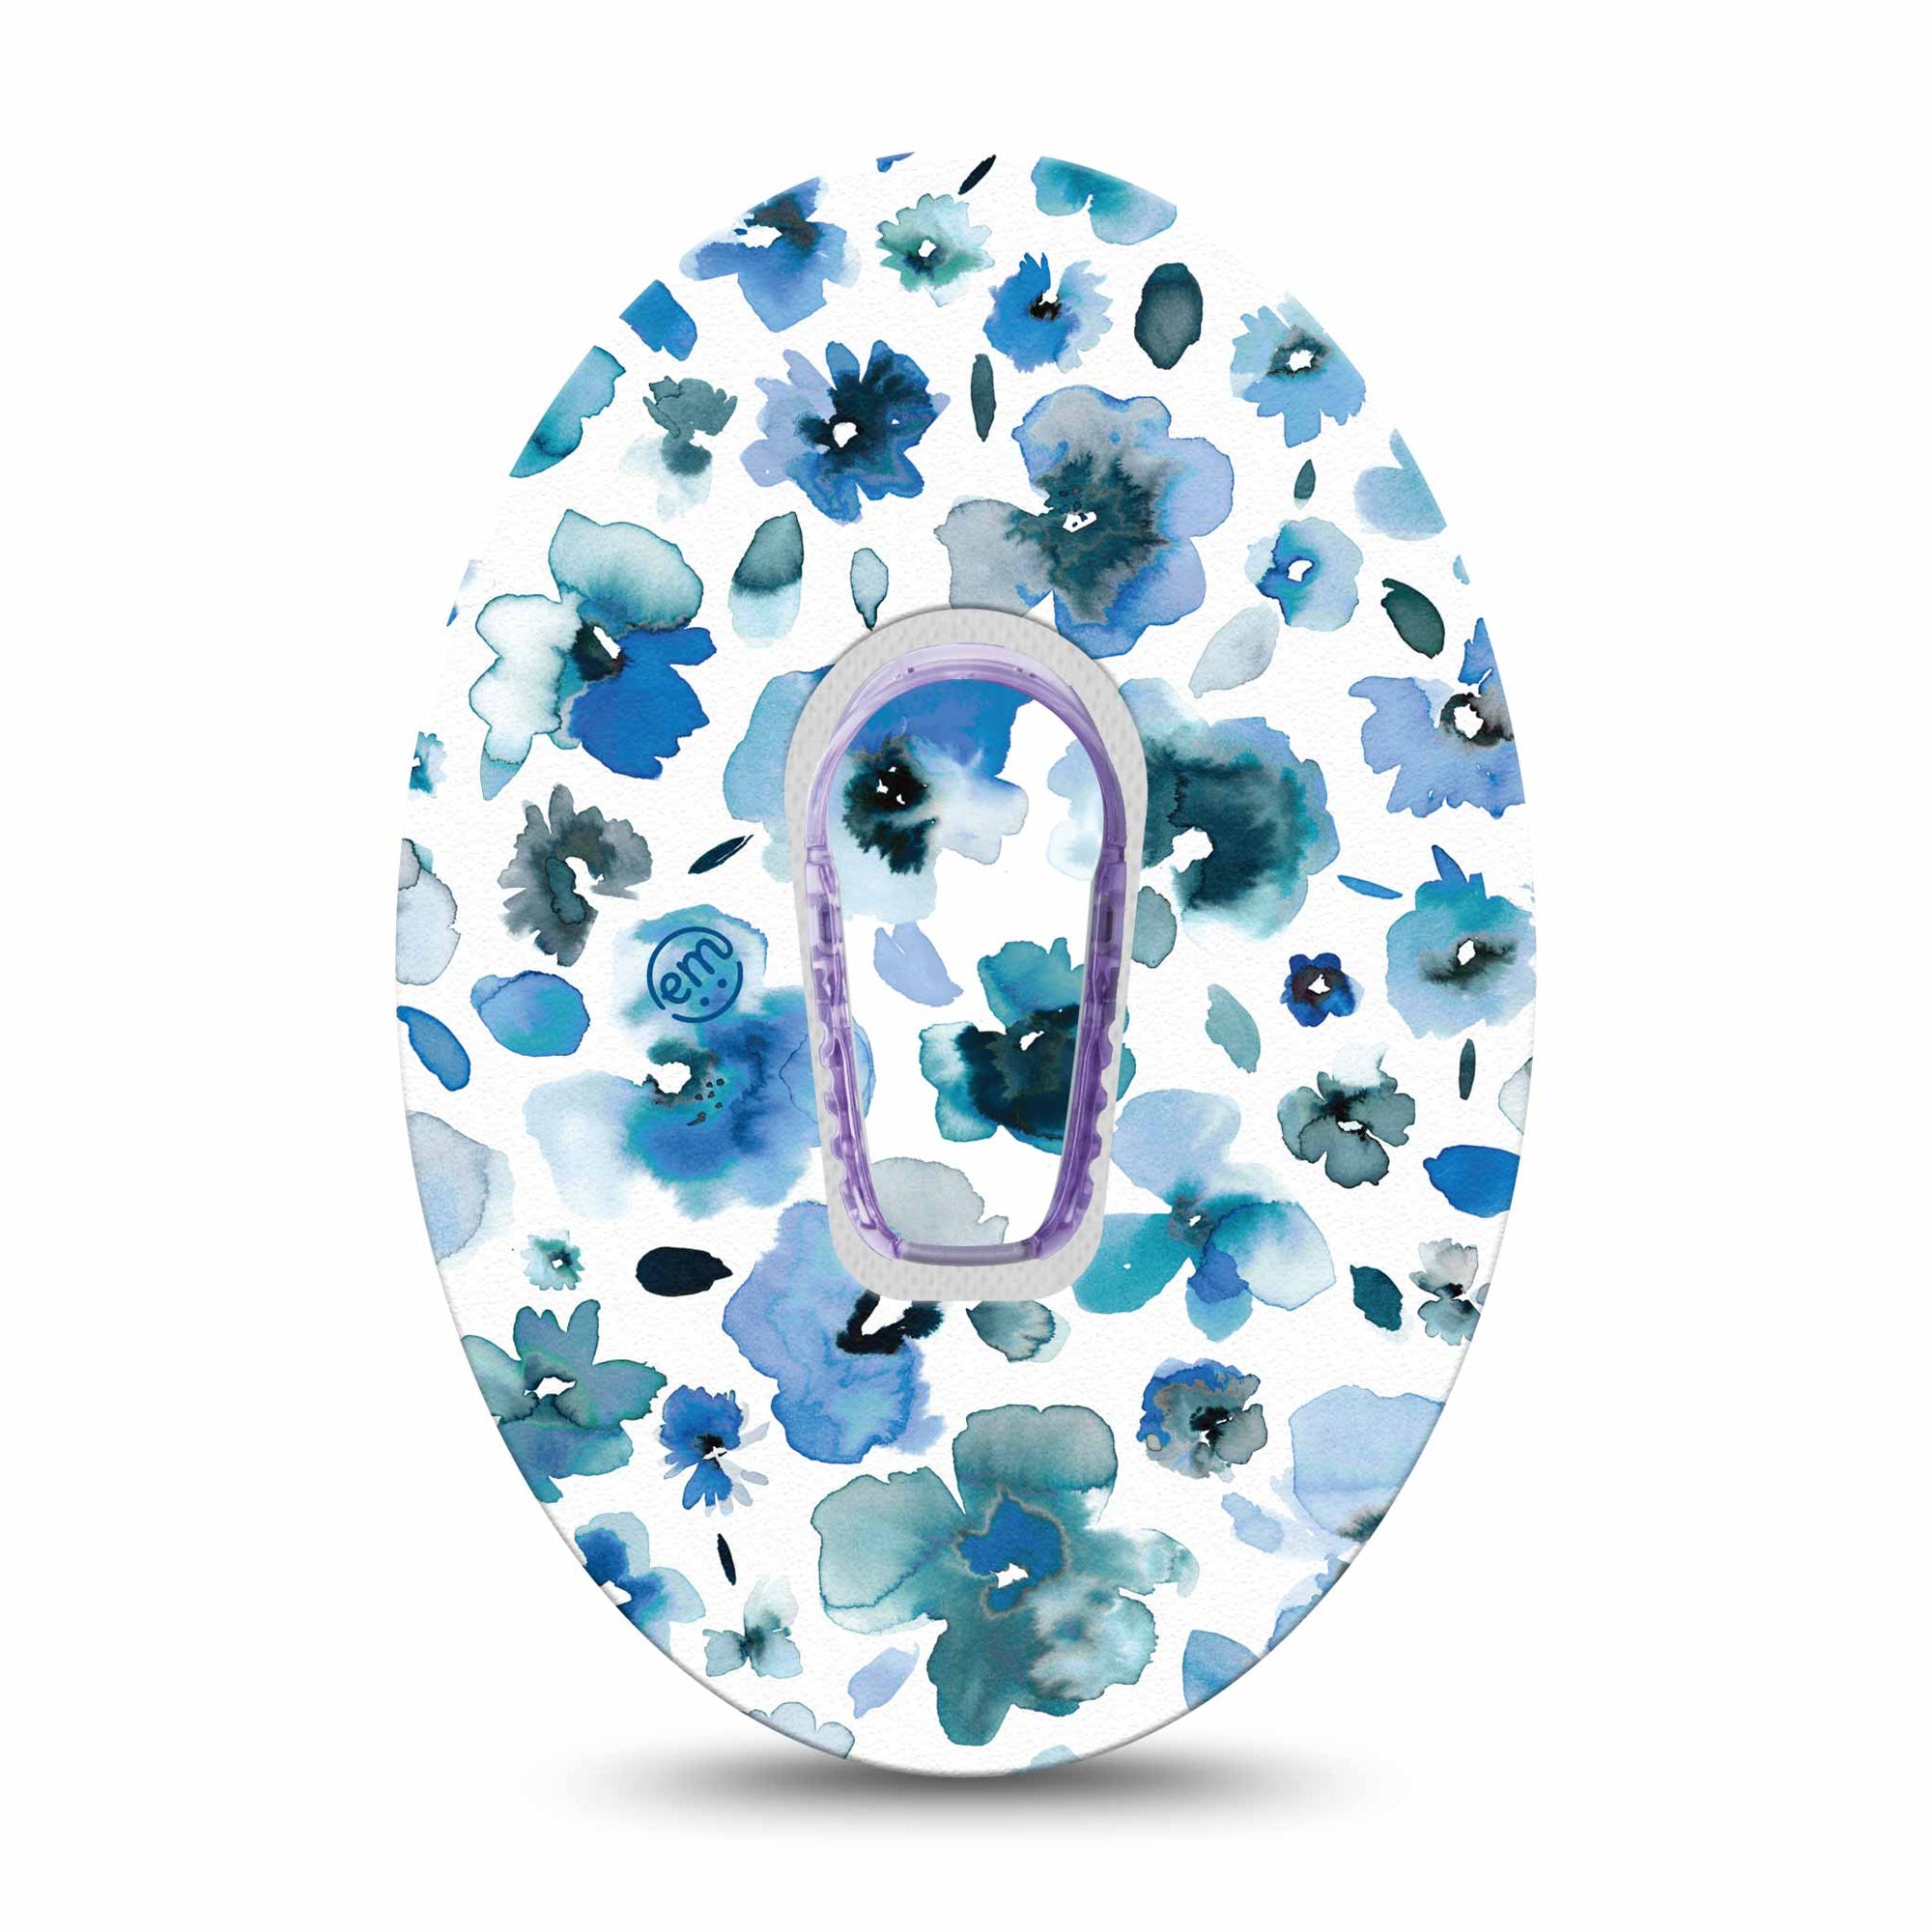 ExpressionMed Sapphire Petals Dexcom G6 Transmitter Sticker and matching adhesive patch, Blue Floral Design